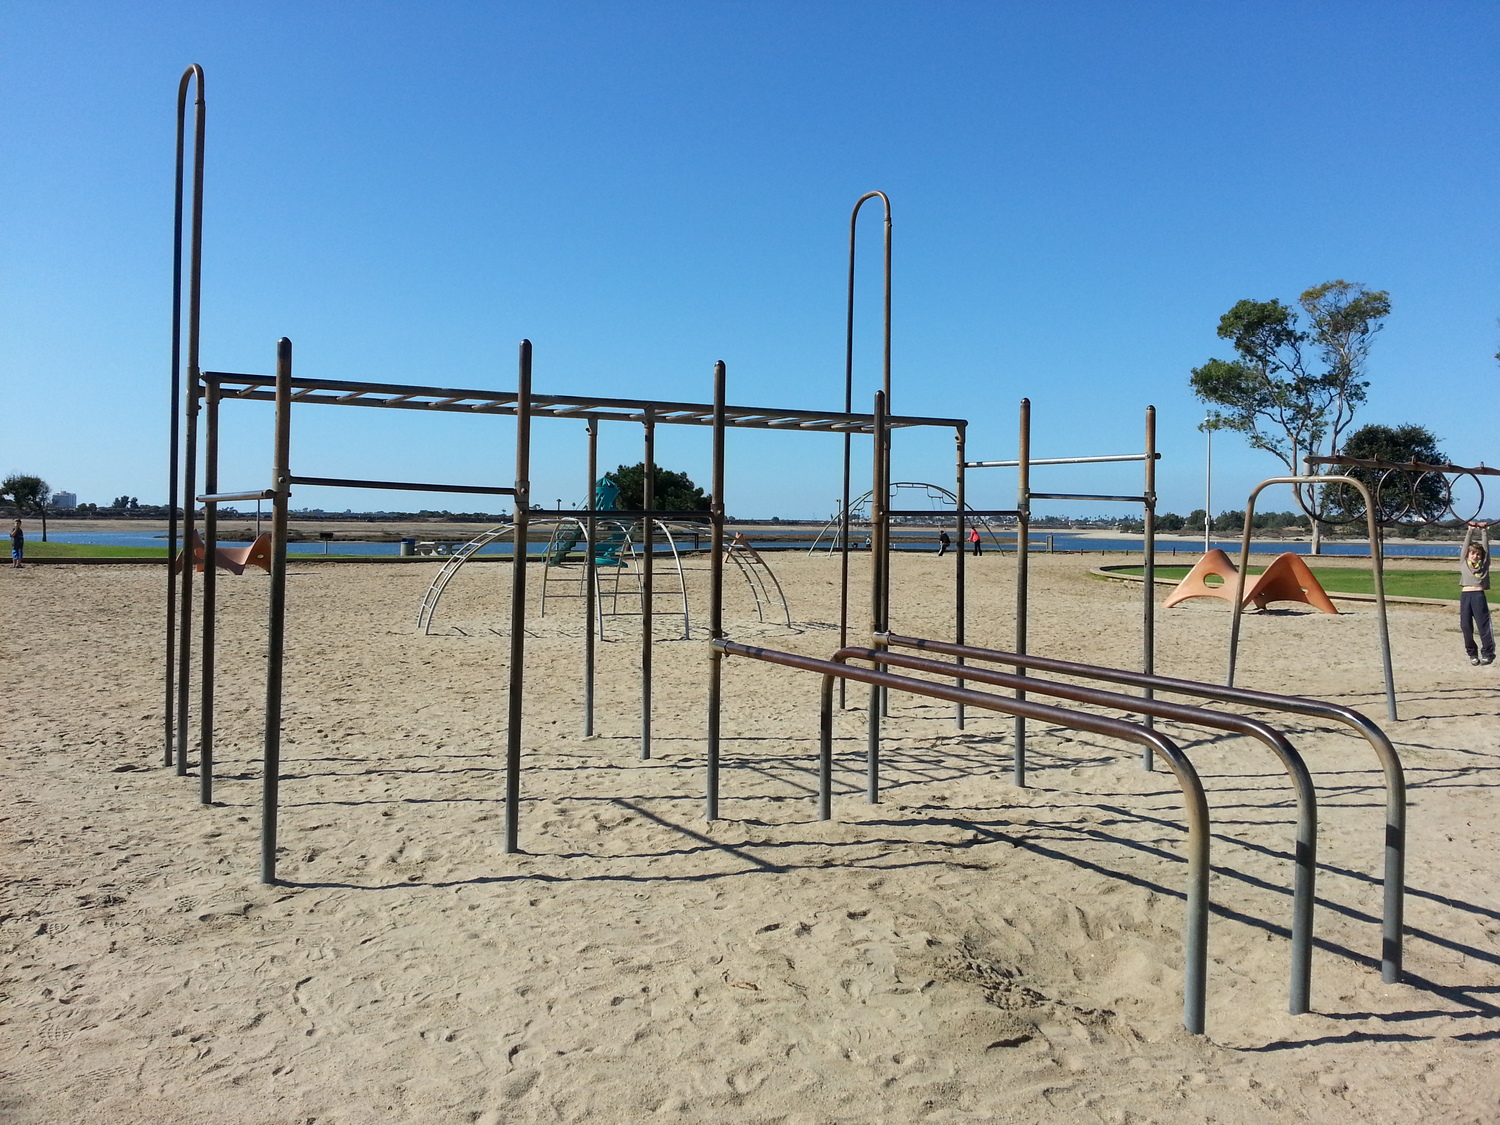 The Calisthenics equipment you'll need in the beginning